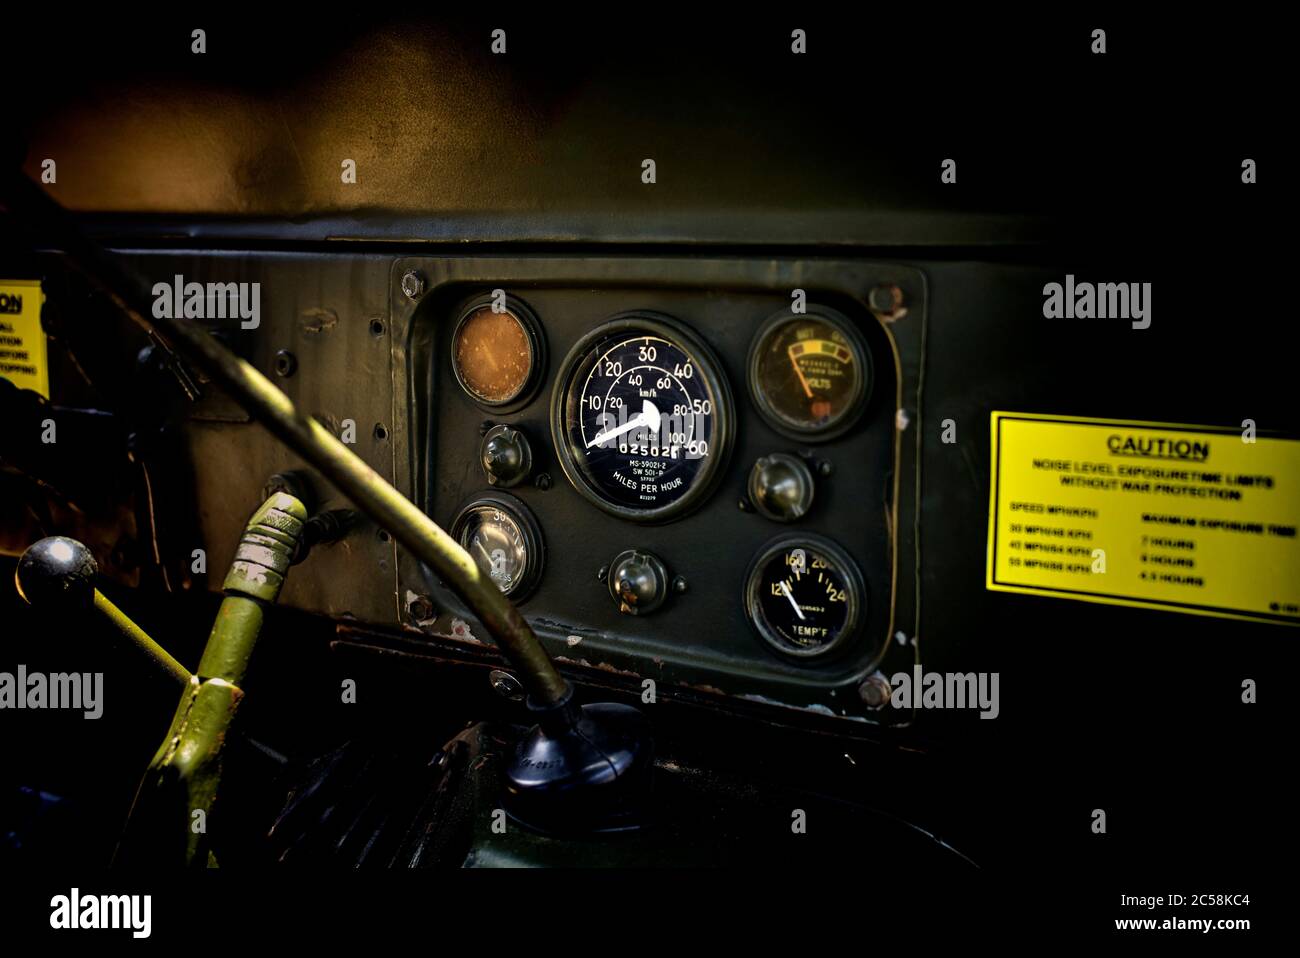 Willys Jeep. Dashboard panel and dials of a vintage World War USA military vehicle Stock Photo